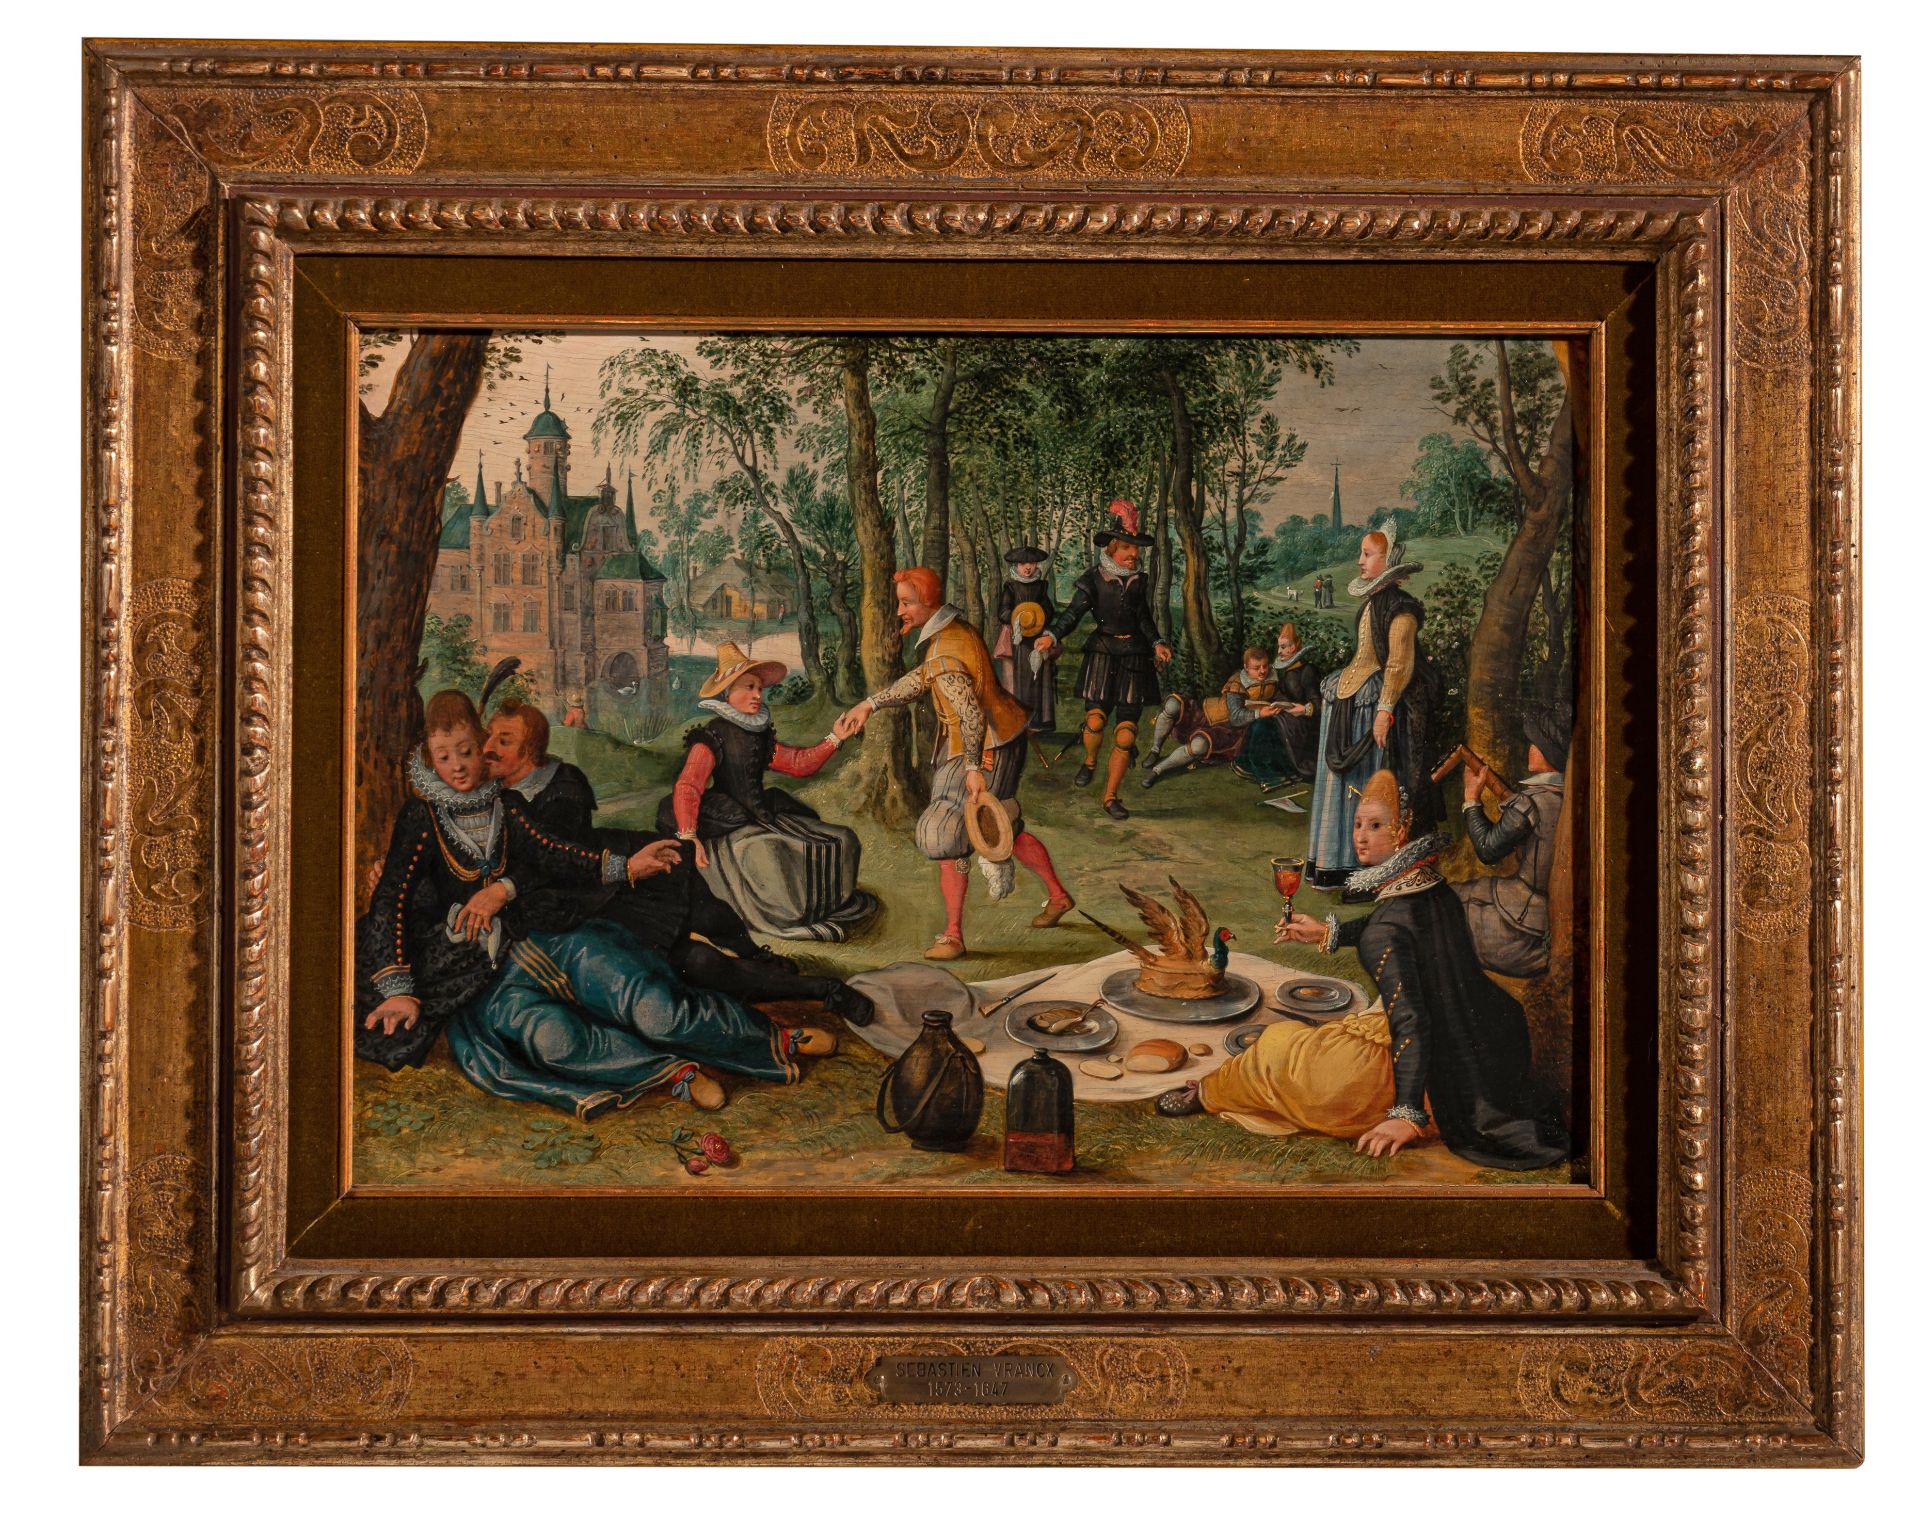 Sebastiaan Vrancx (studio of), Courtly company at the picnic in the park, 17thC, oil on wood, 26 x 3 - Image 2 of 6